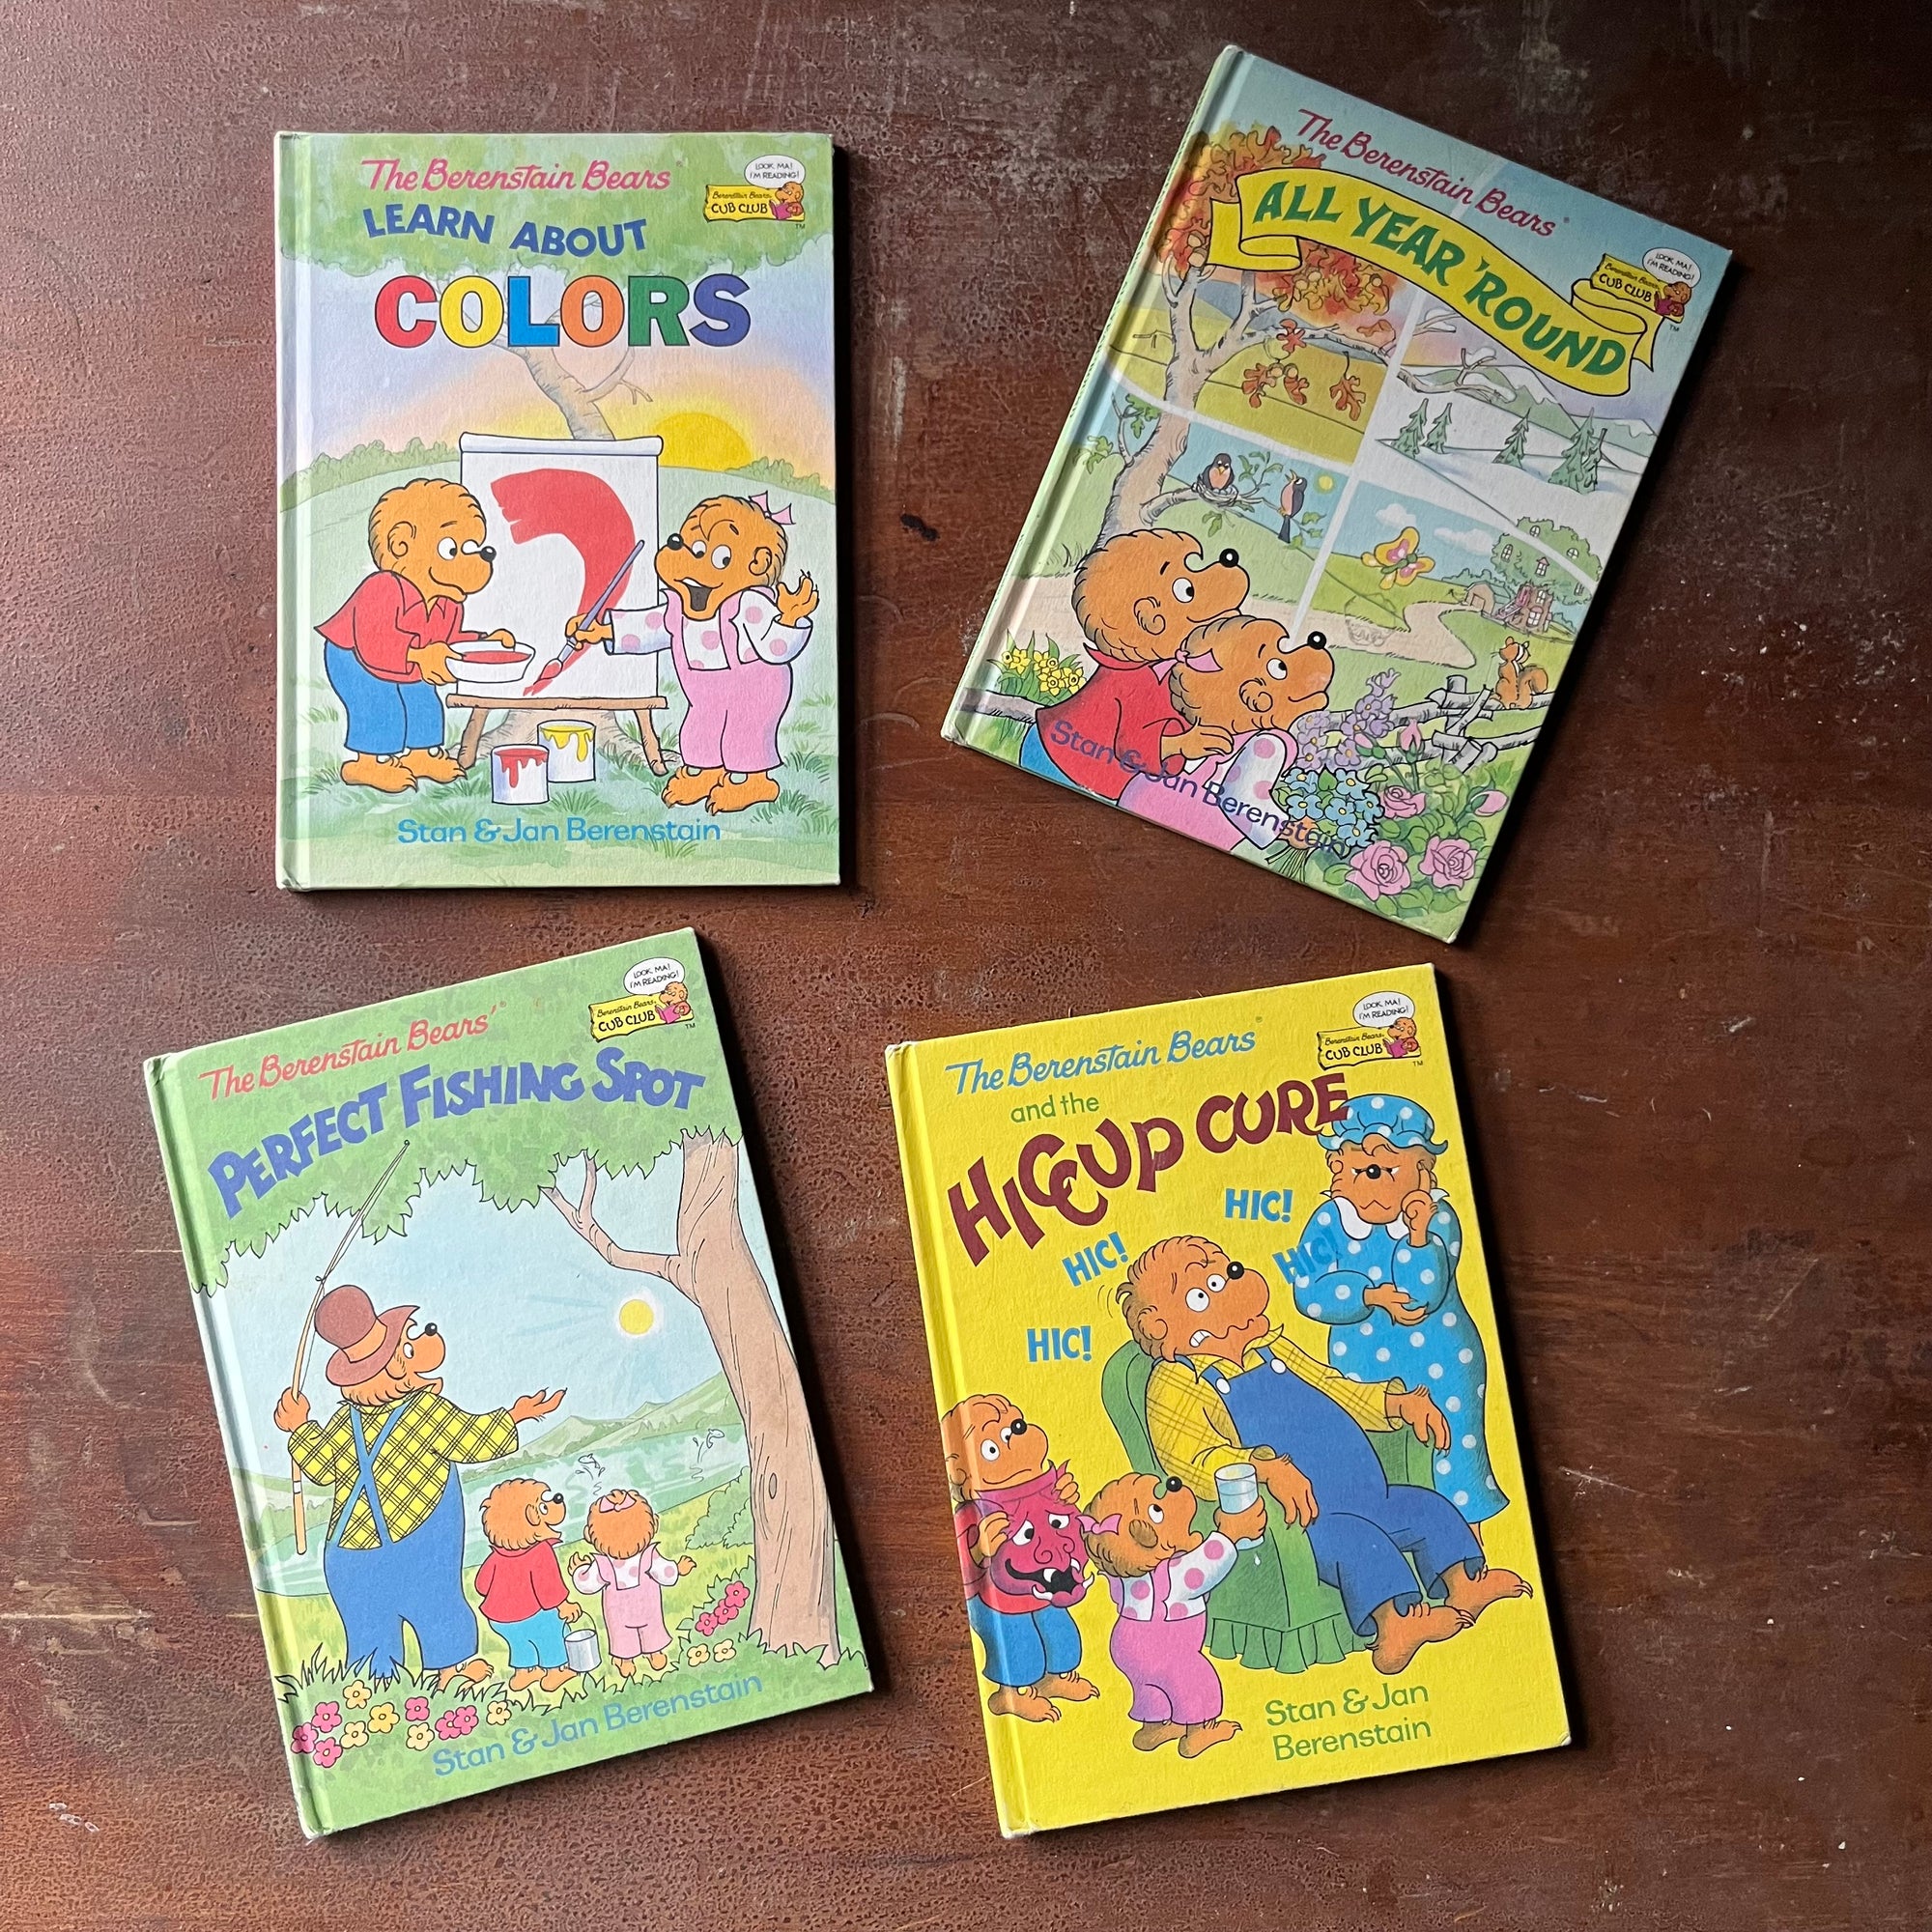 vintage children's picture books - Berenstain Bears Cub Club Book Set - The Hiccup Cure, Perfect Fishing Spot, All Year Round & Colors by Stan & Jan Berenstain - view of the front covers